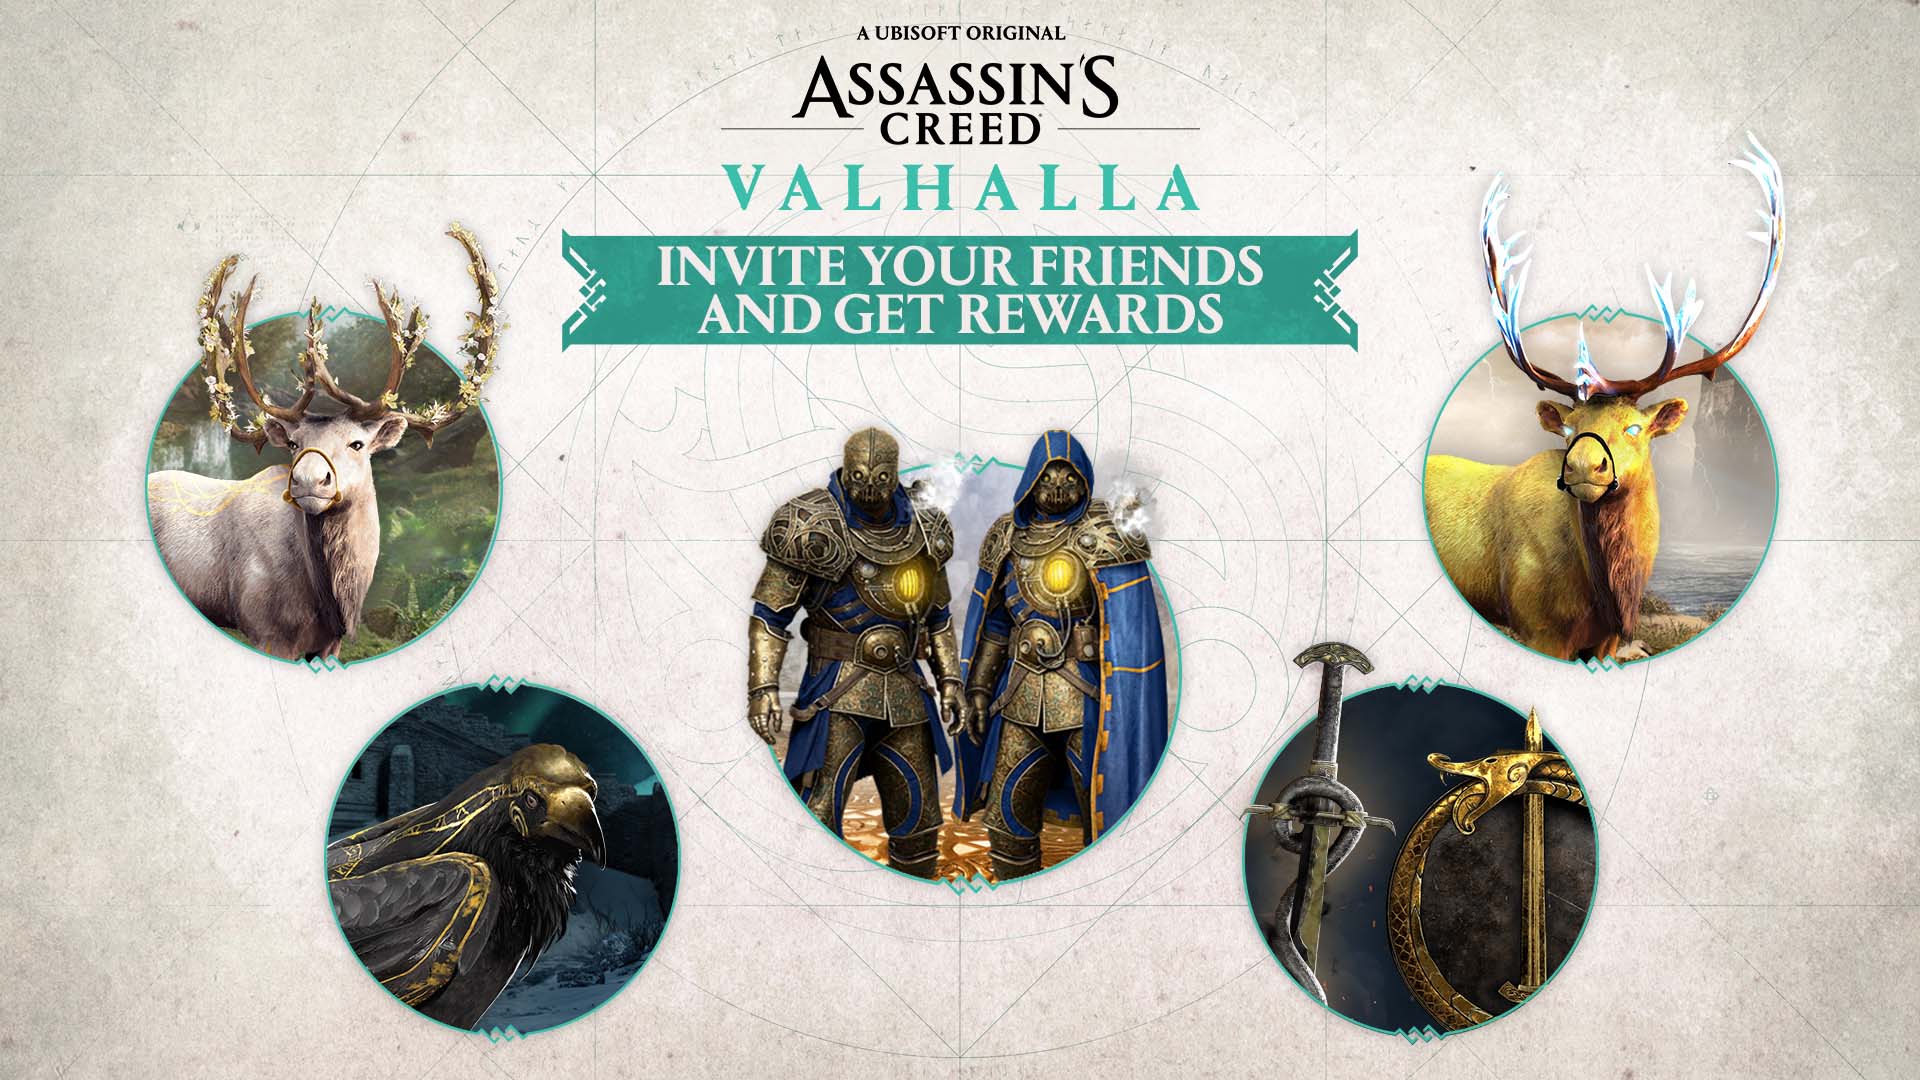 Play Assassin's Creed Valhalla for free right now